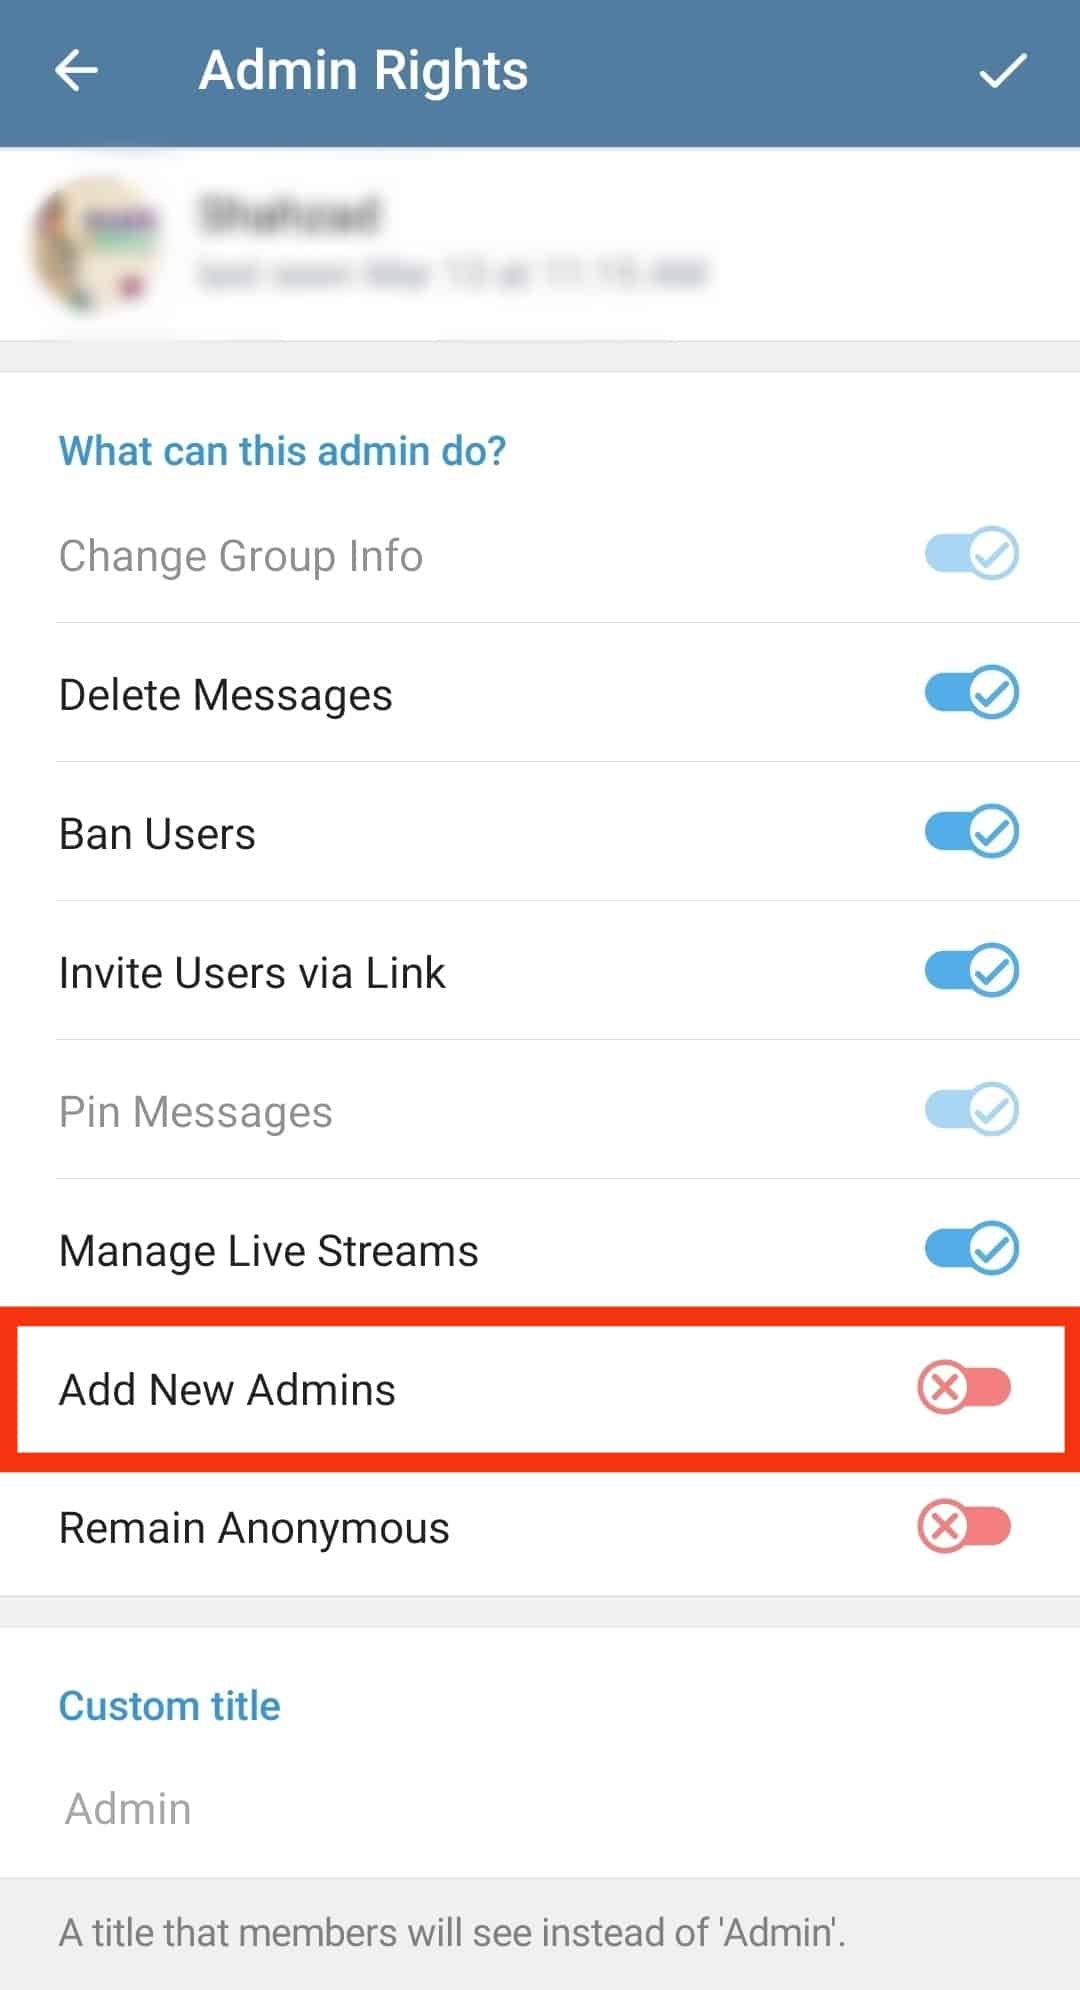 Enable Add New Admins Option